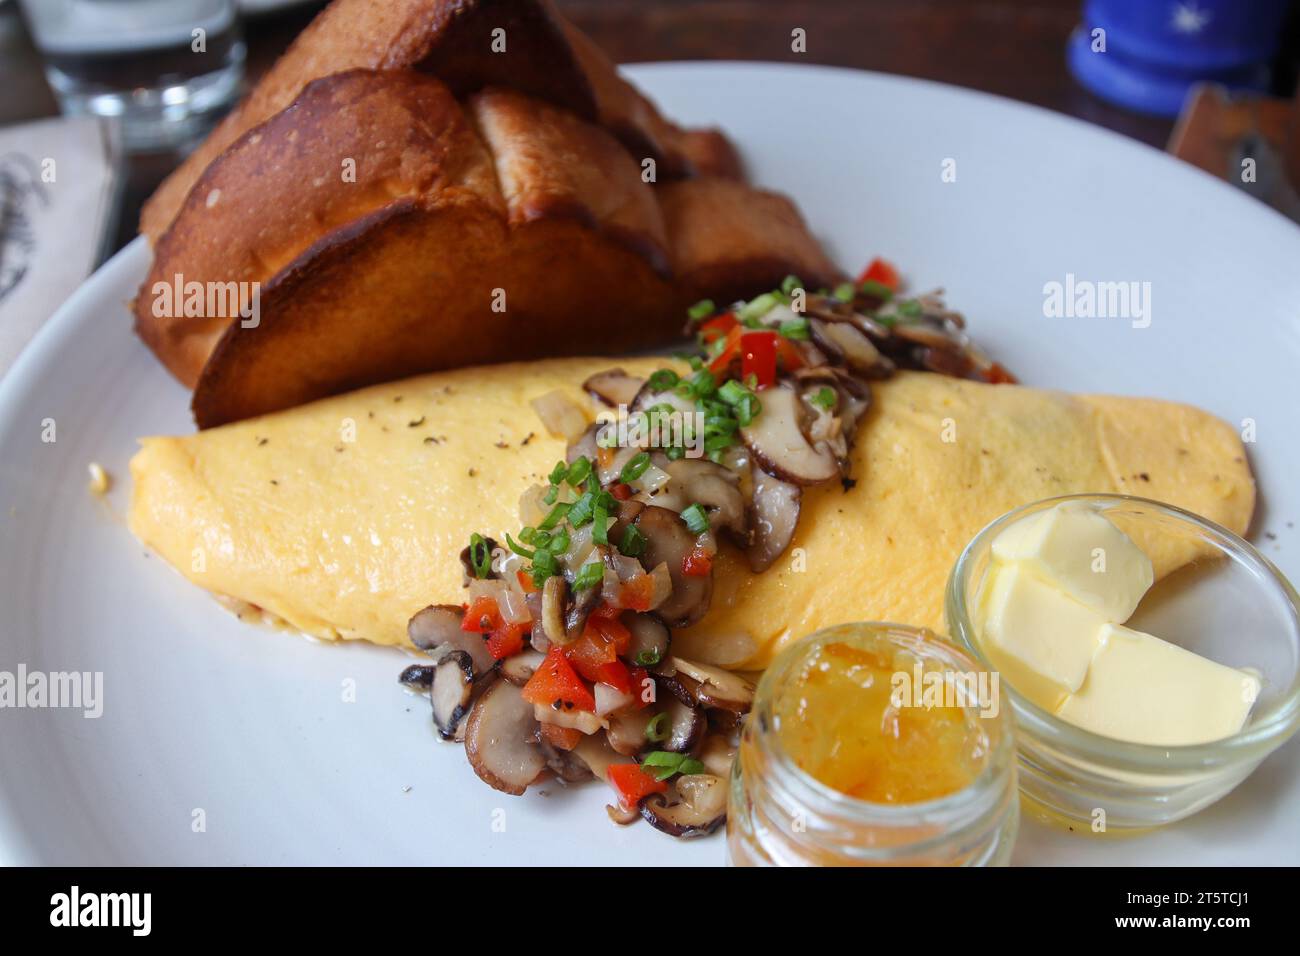 Omelette with mushrooms and fried bread on a plate Stock Photo